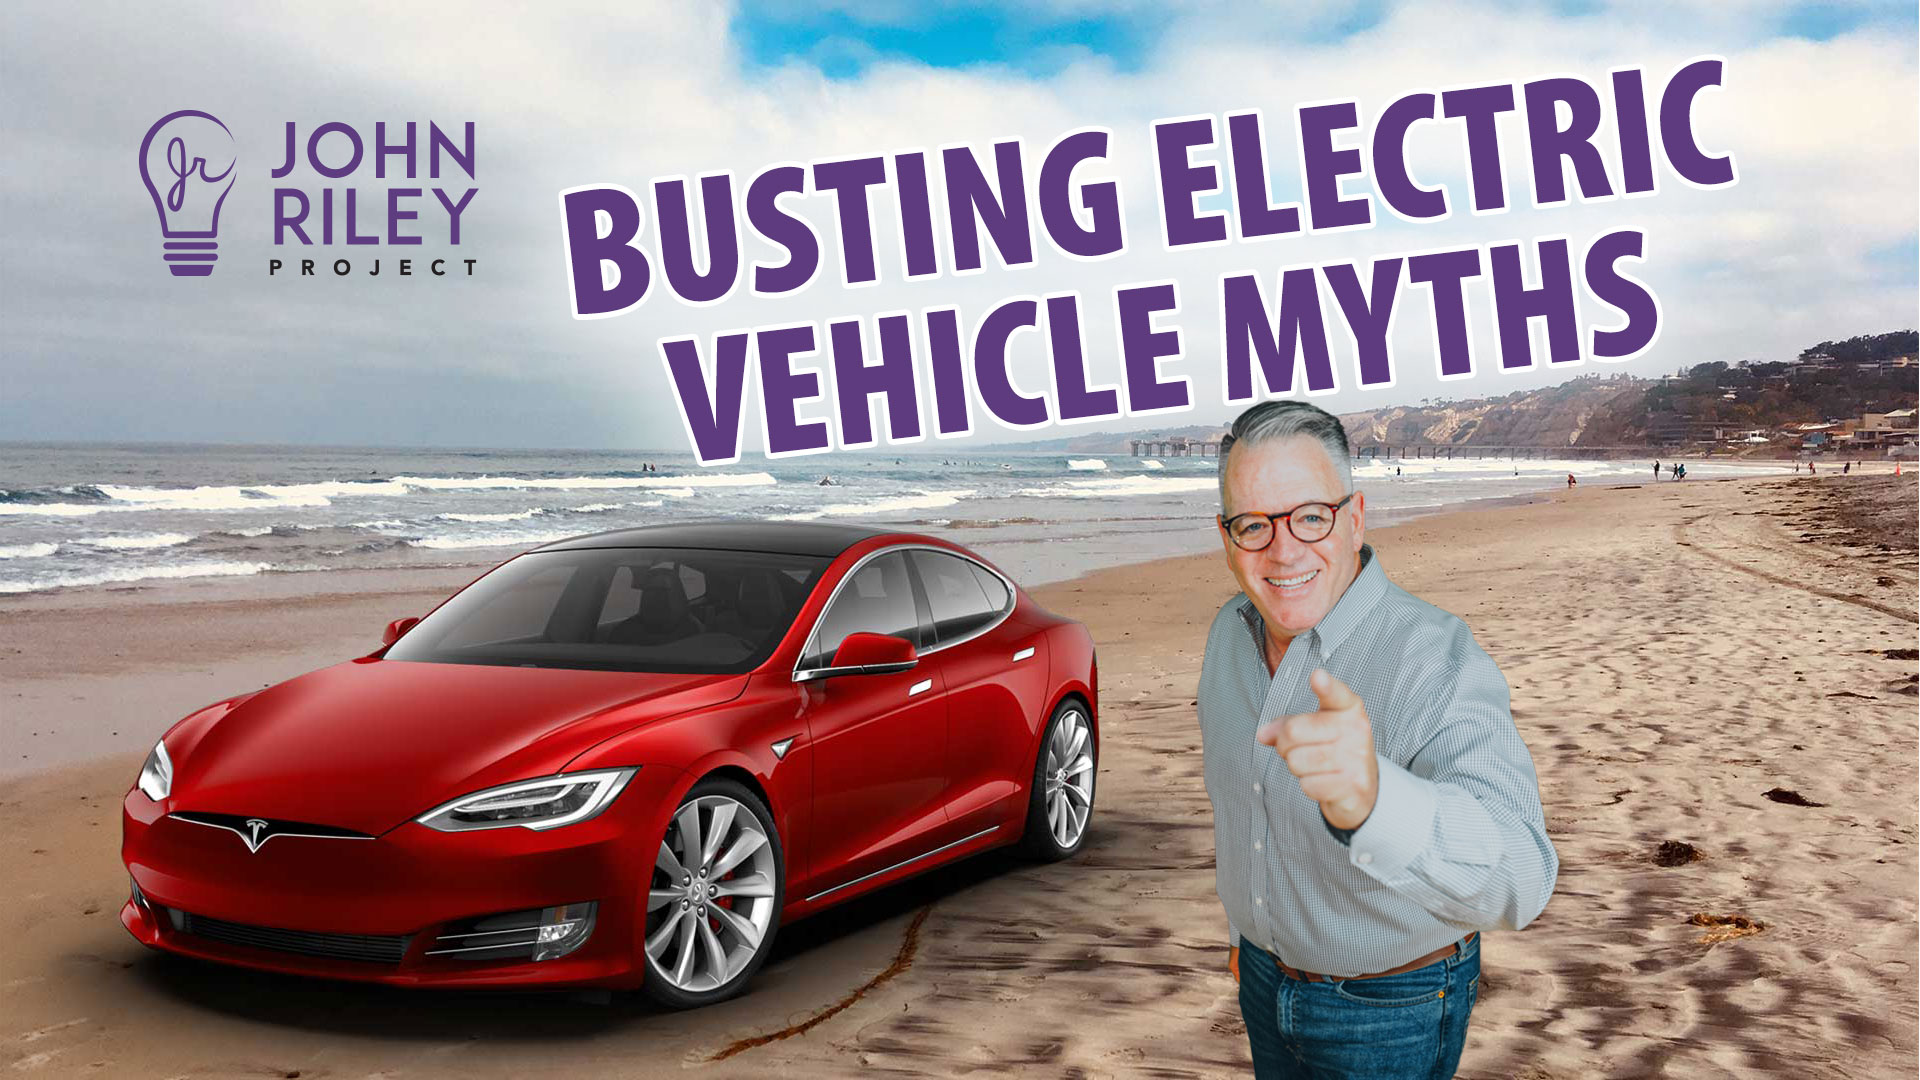 electric vehicle, myths, busting, john riley project, JRP0193